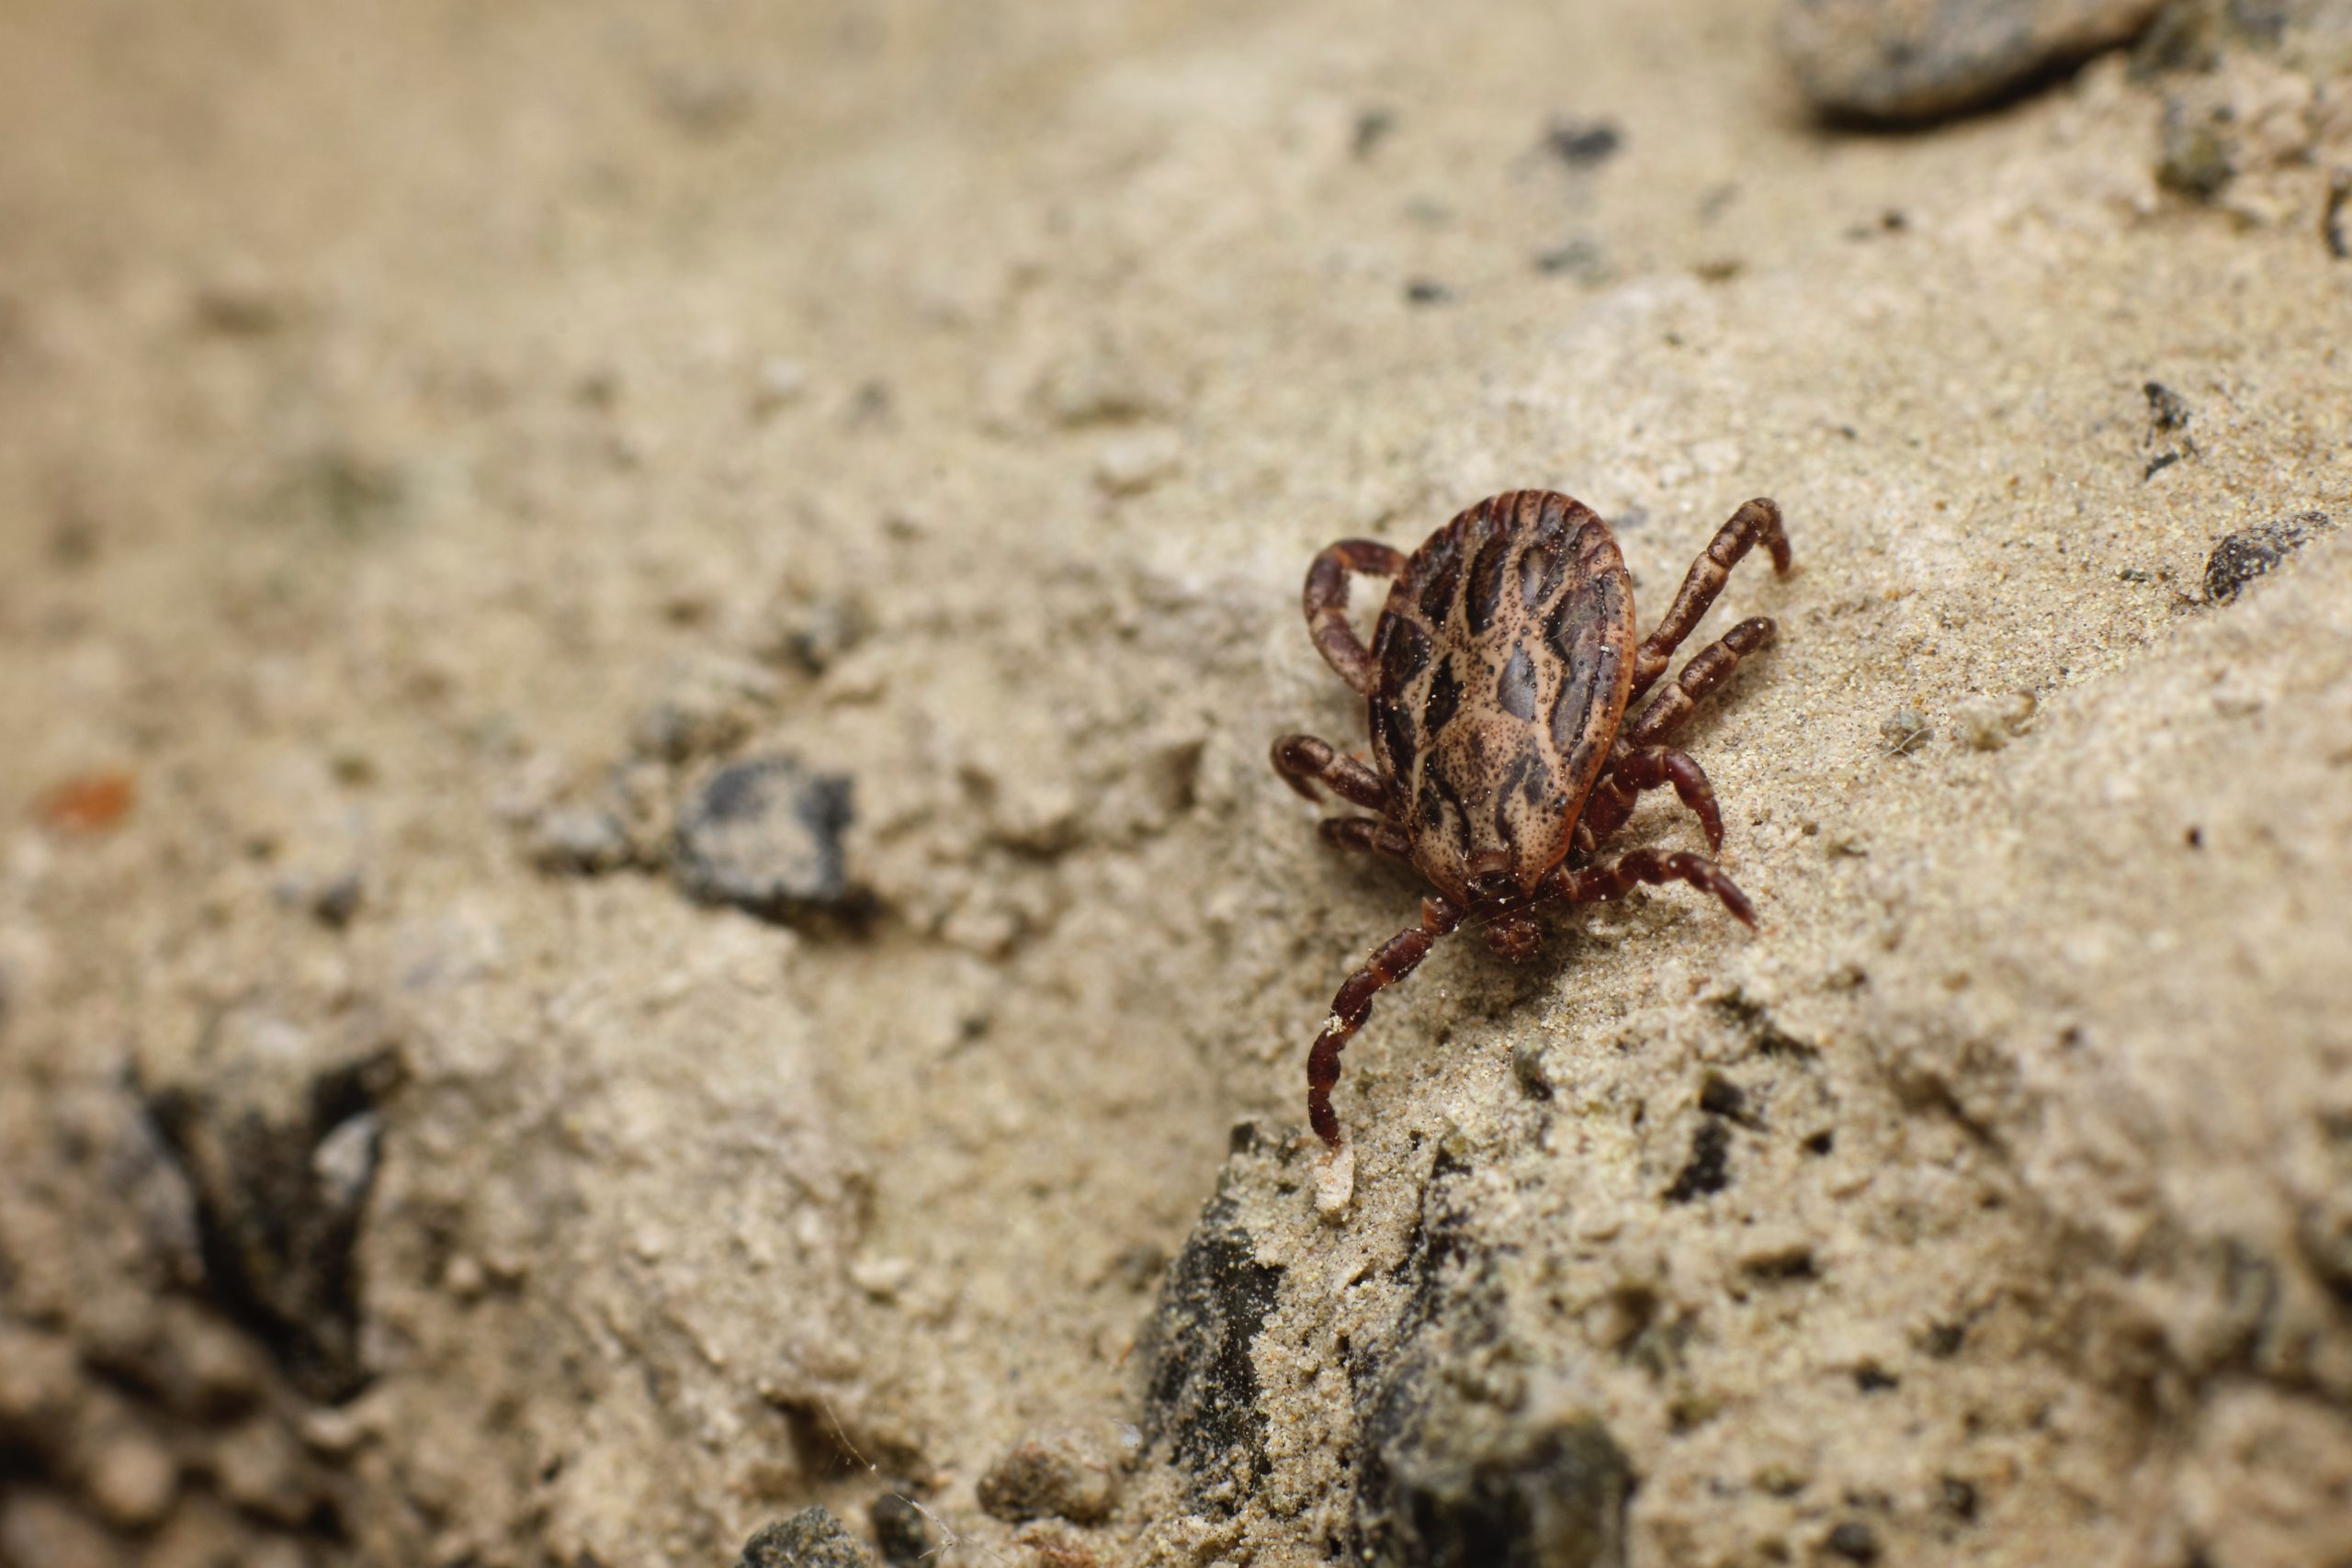 A brown and beige Texas tick crawls on a rock.